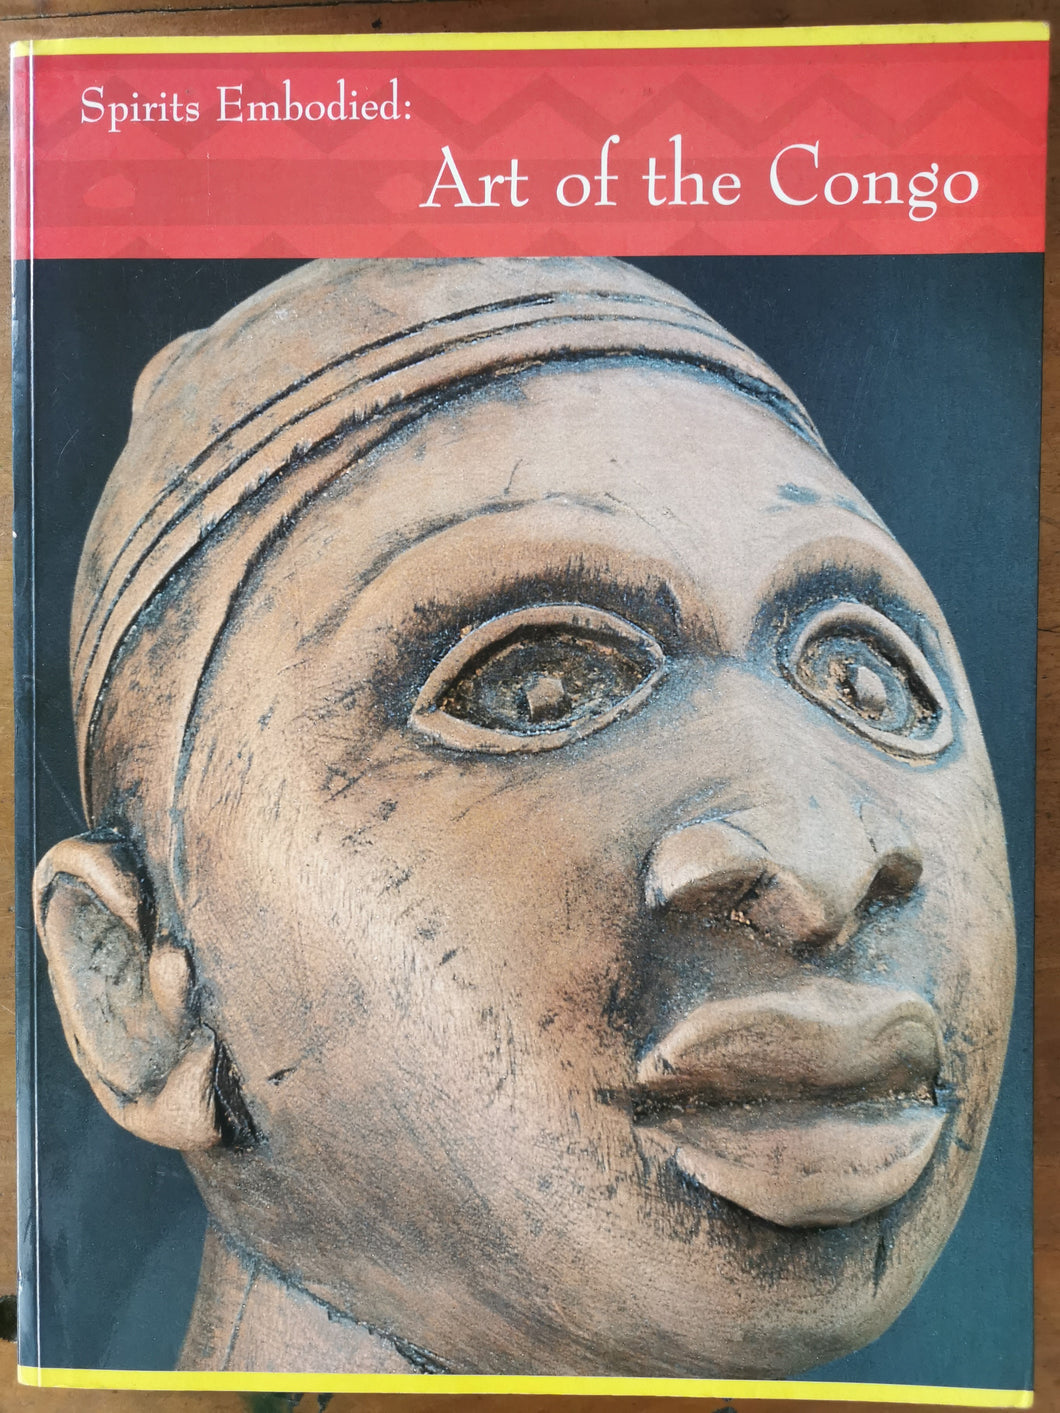 Spirits Embodied: Art of the Congo